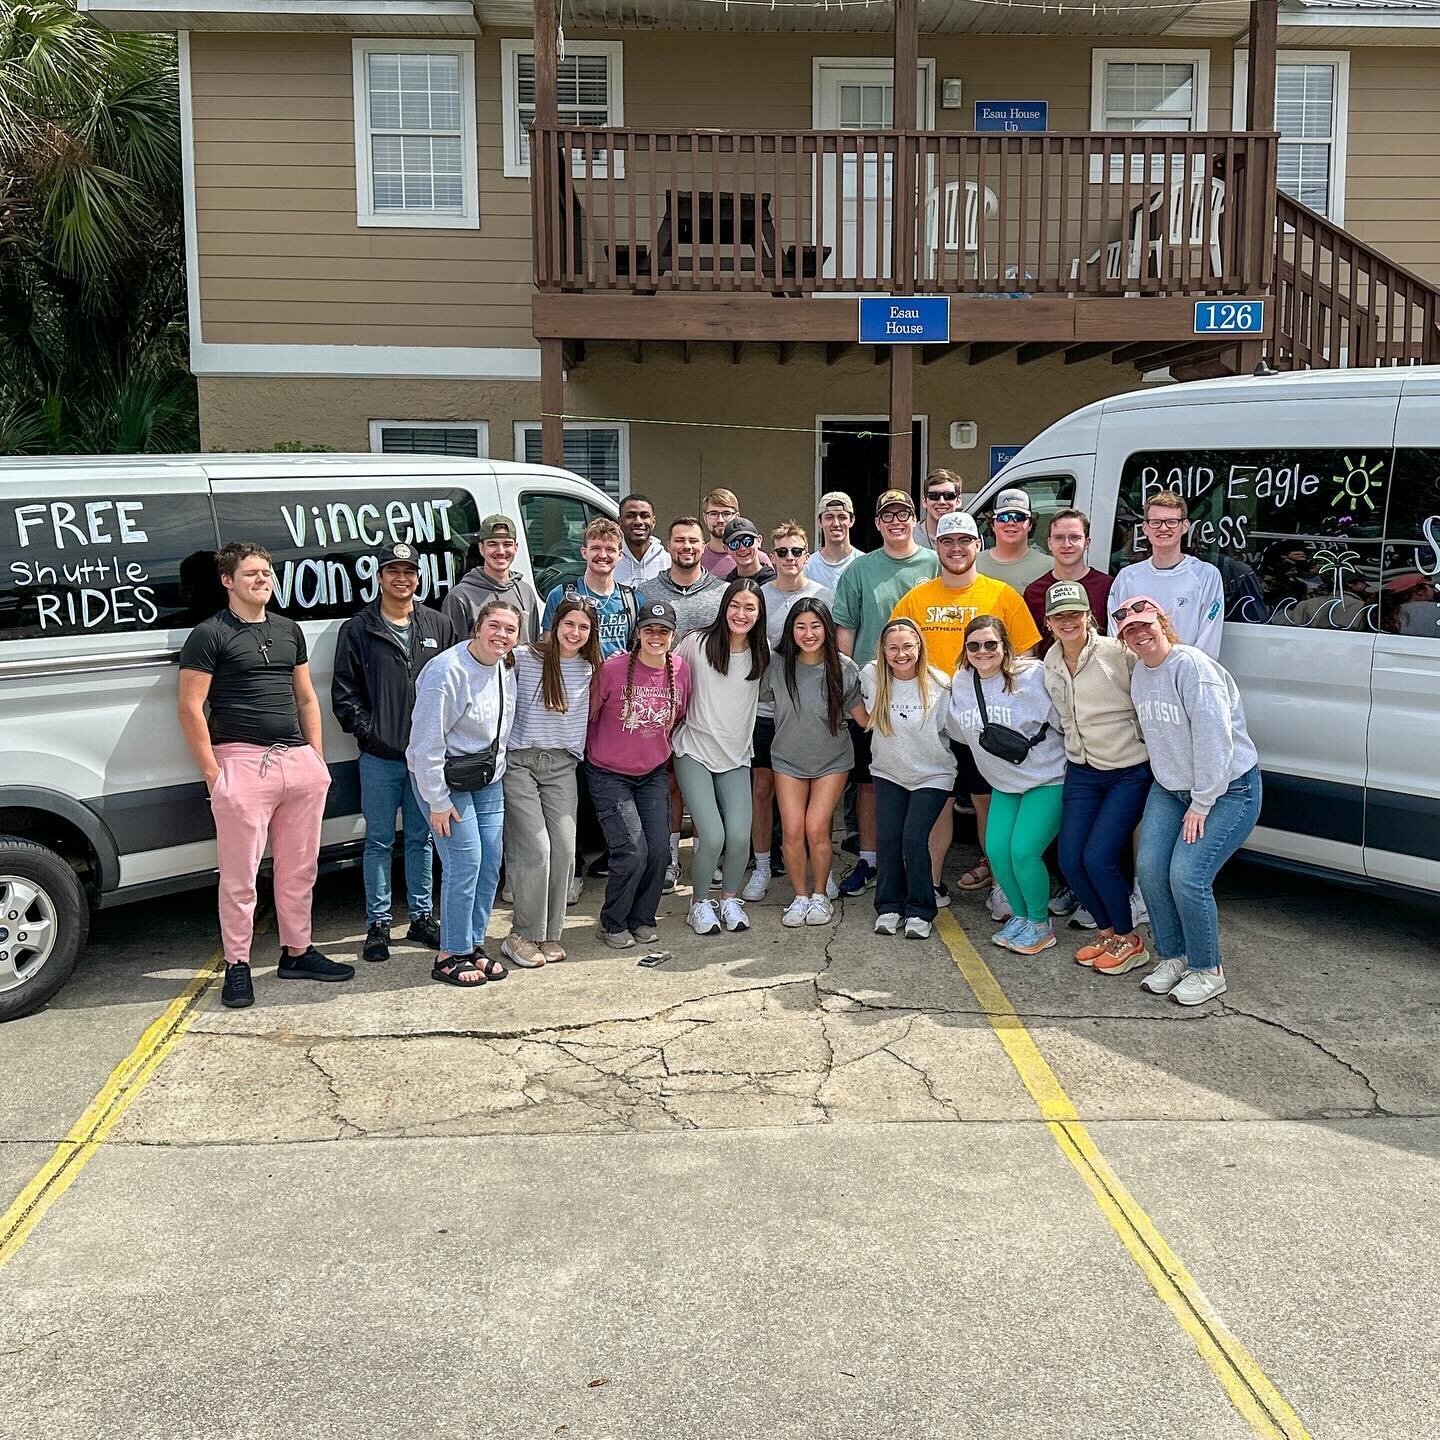 Please be in prayer for our team of 30 students and staff as we serve at @beachreachpcb in Panama City Beach for the week!

We&rsquo;ll be giving rides and walking the streets serving spring breakers with the hope of getting to share the love of Chri